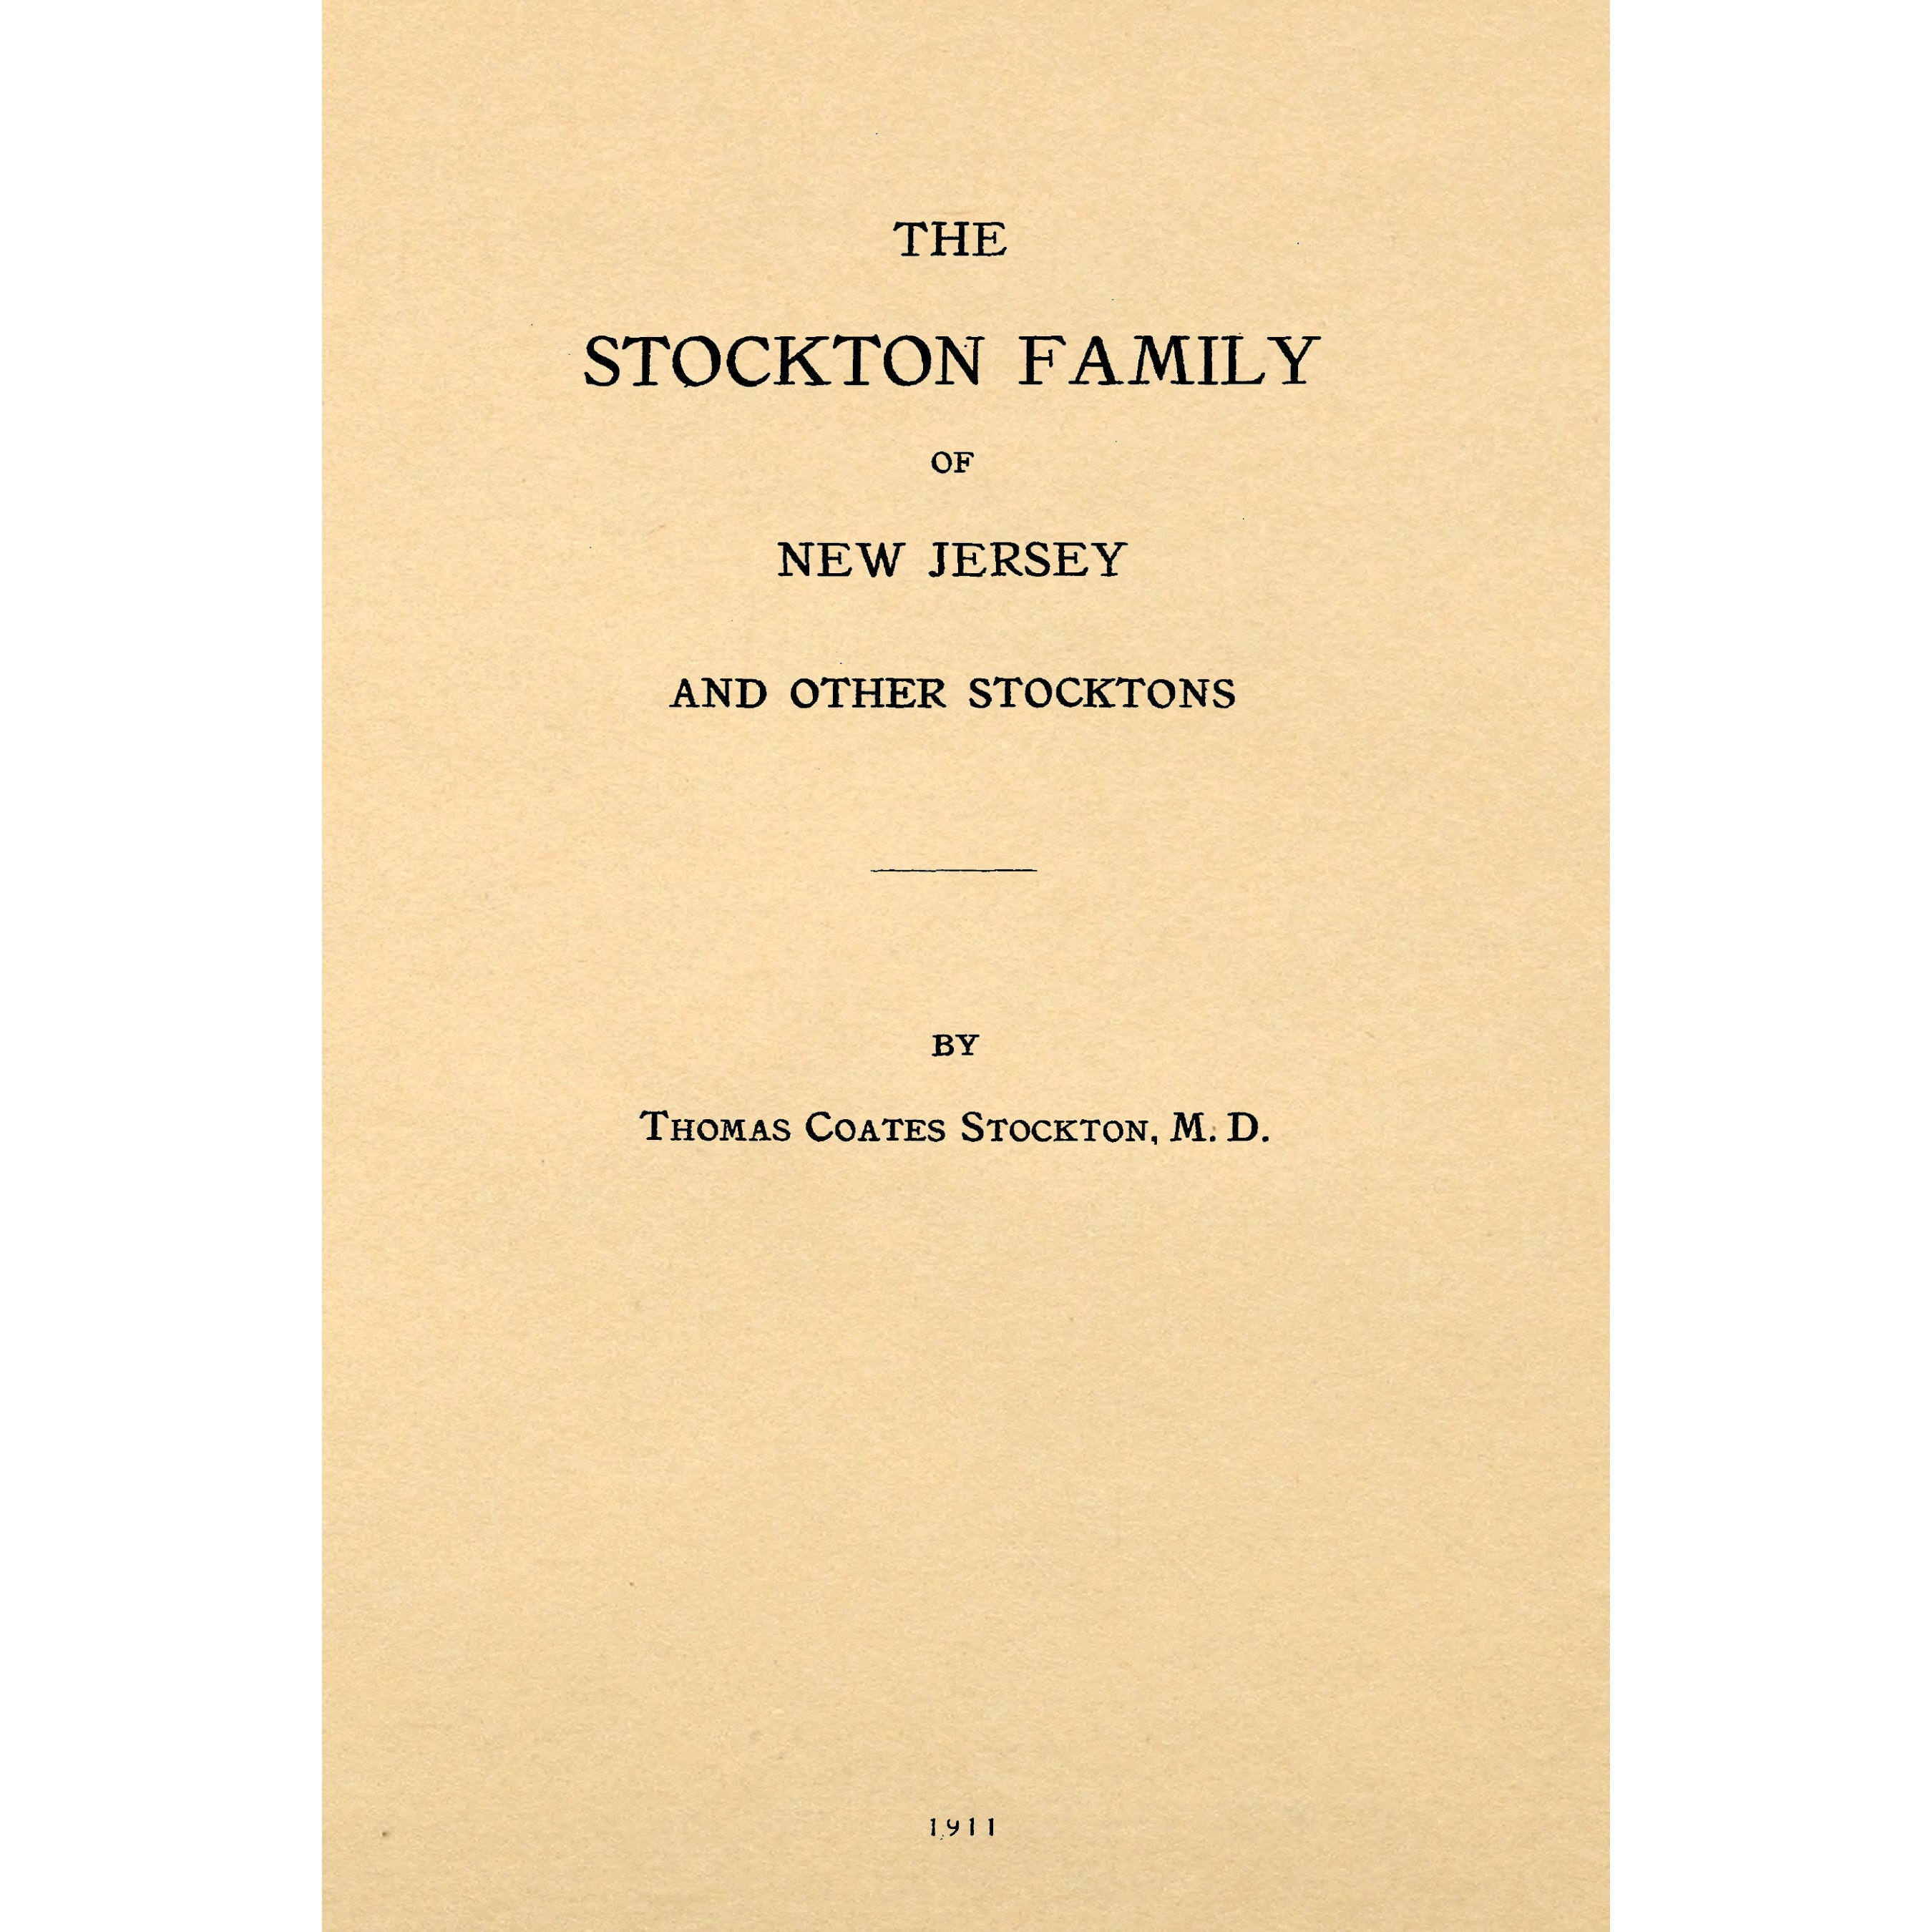 The Stockton Family of New Jersey and other Stocktons